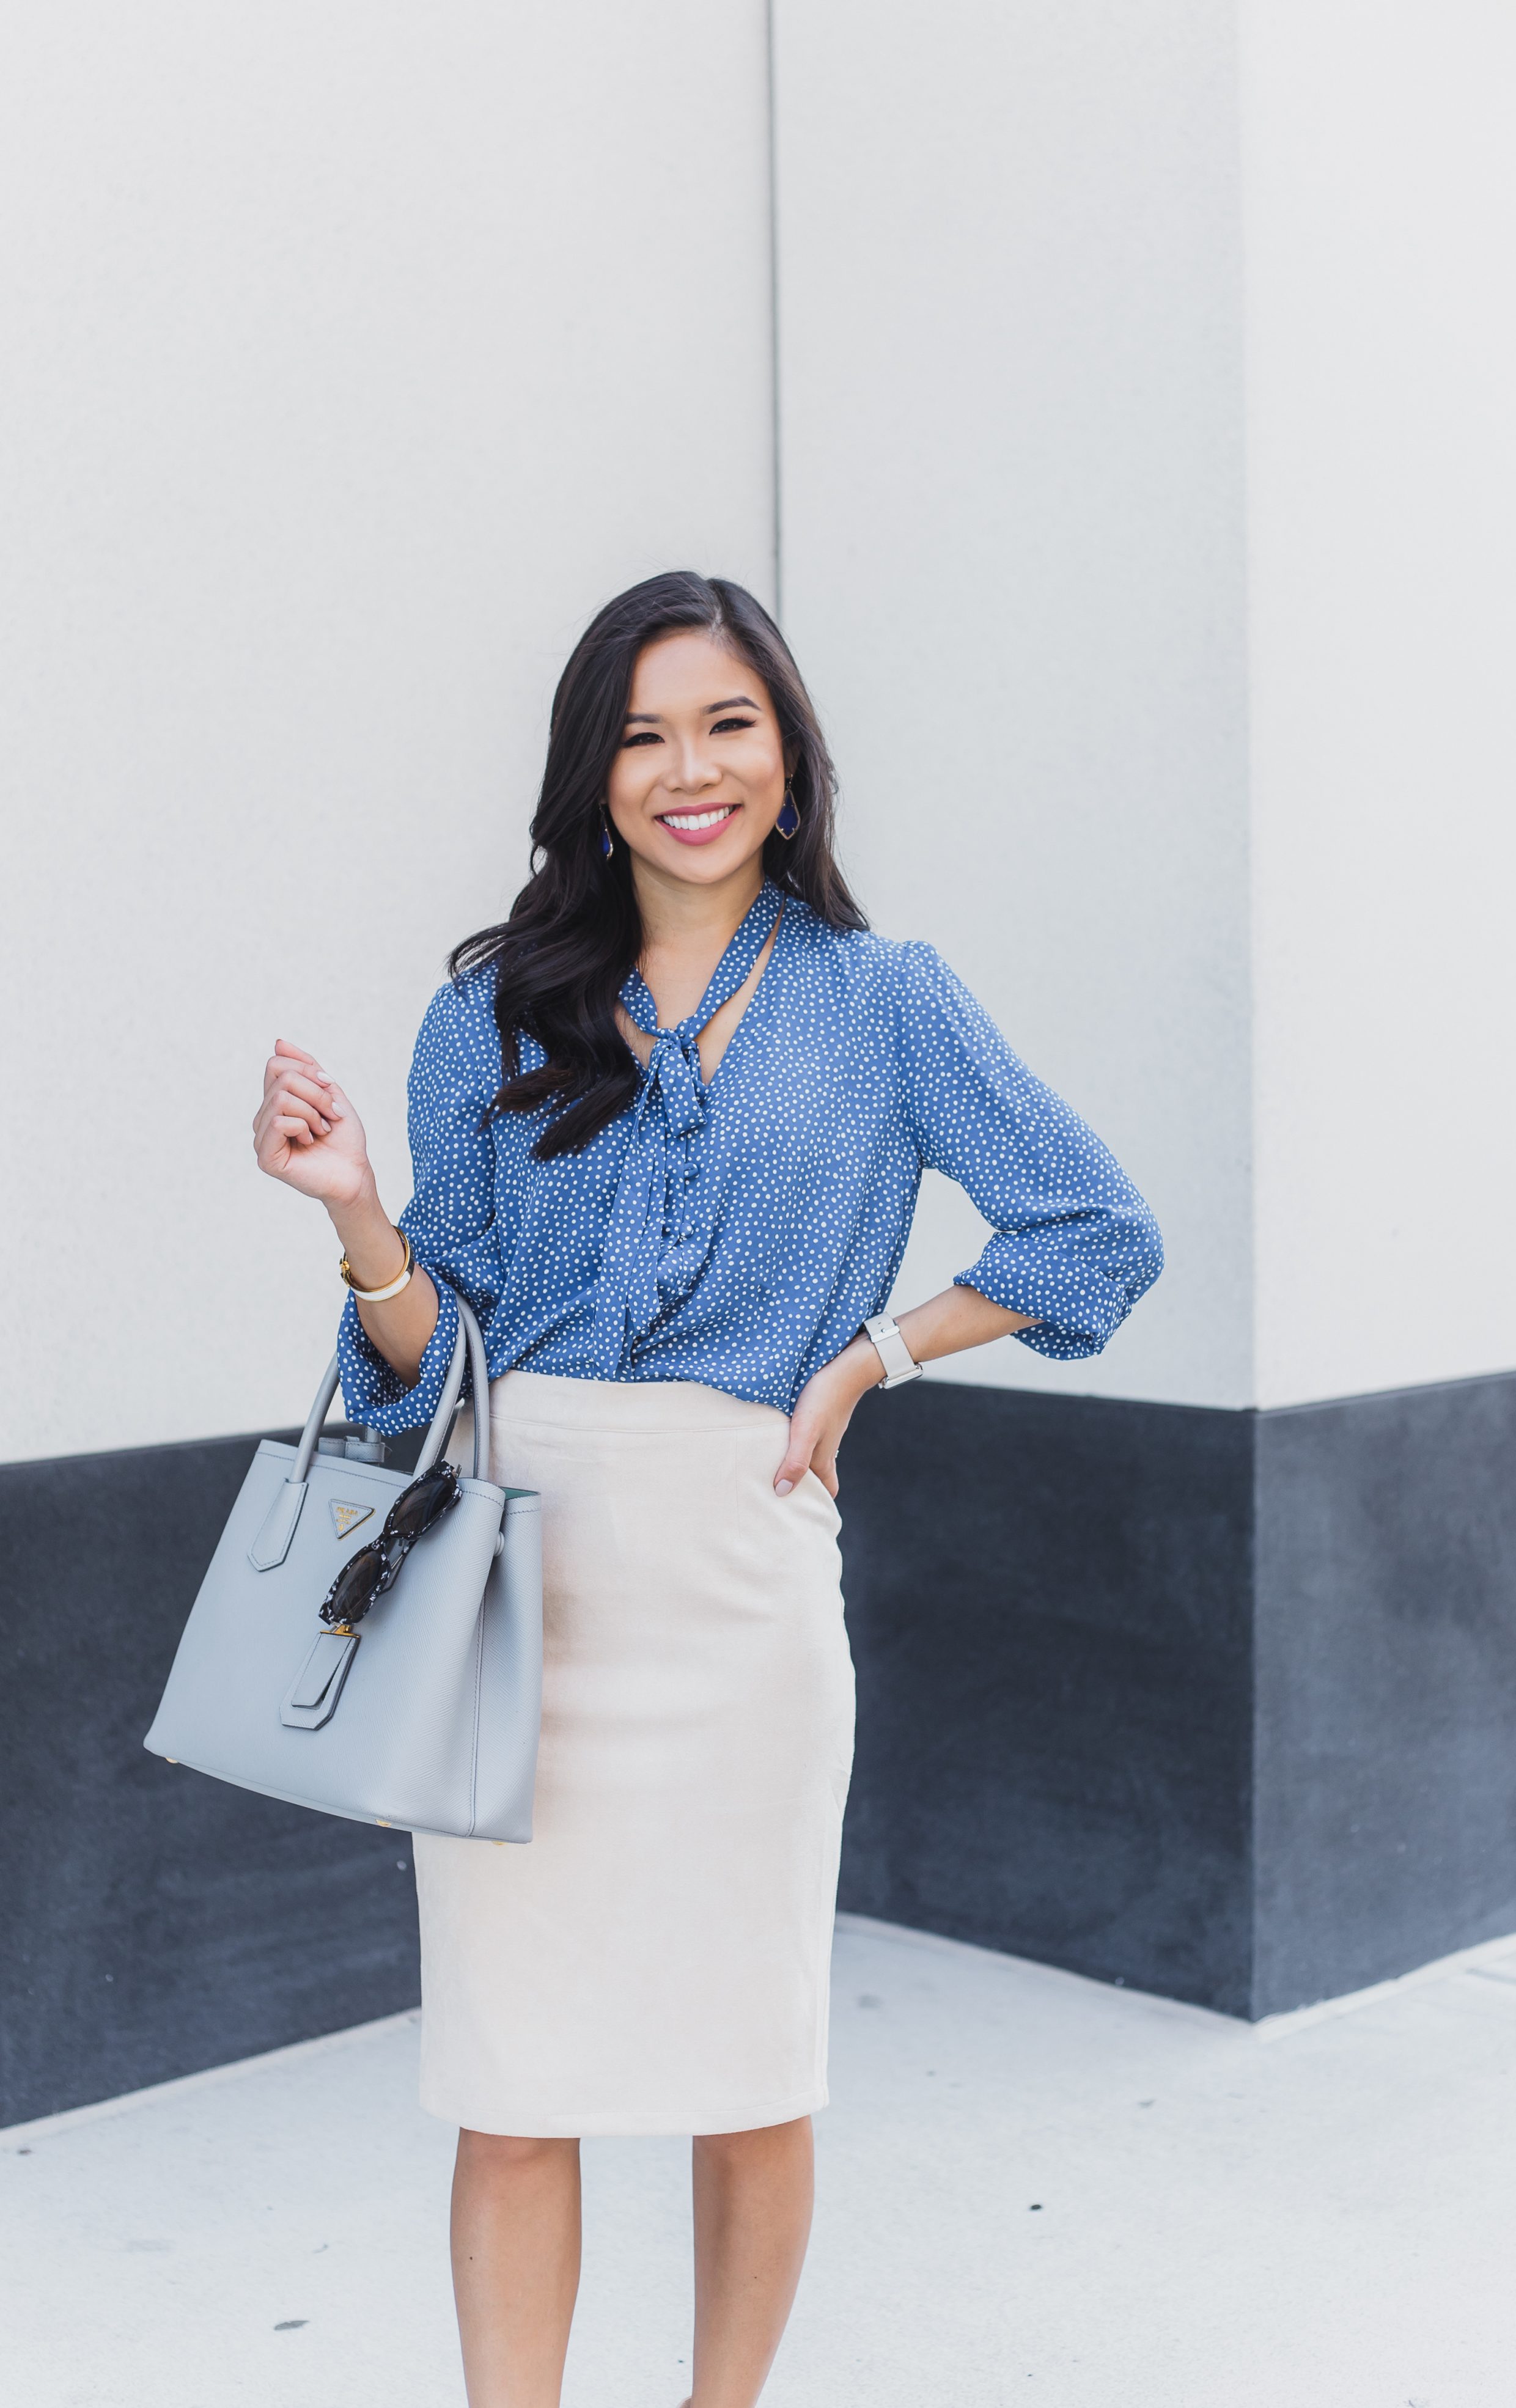 COLOR & CHIC | Work wear with blue polka dots and suede